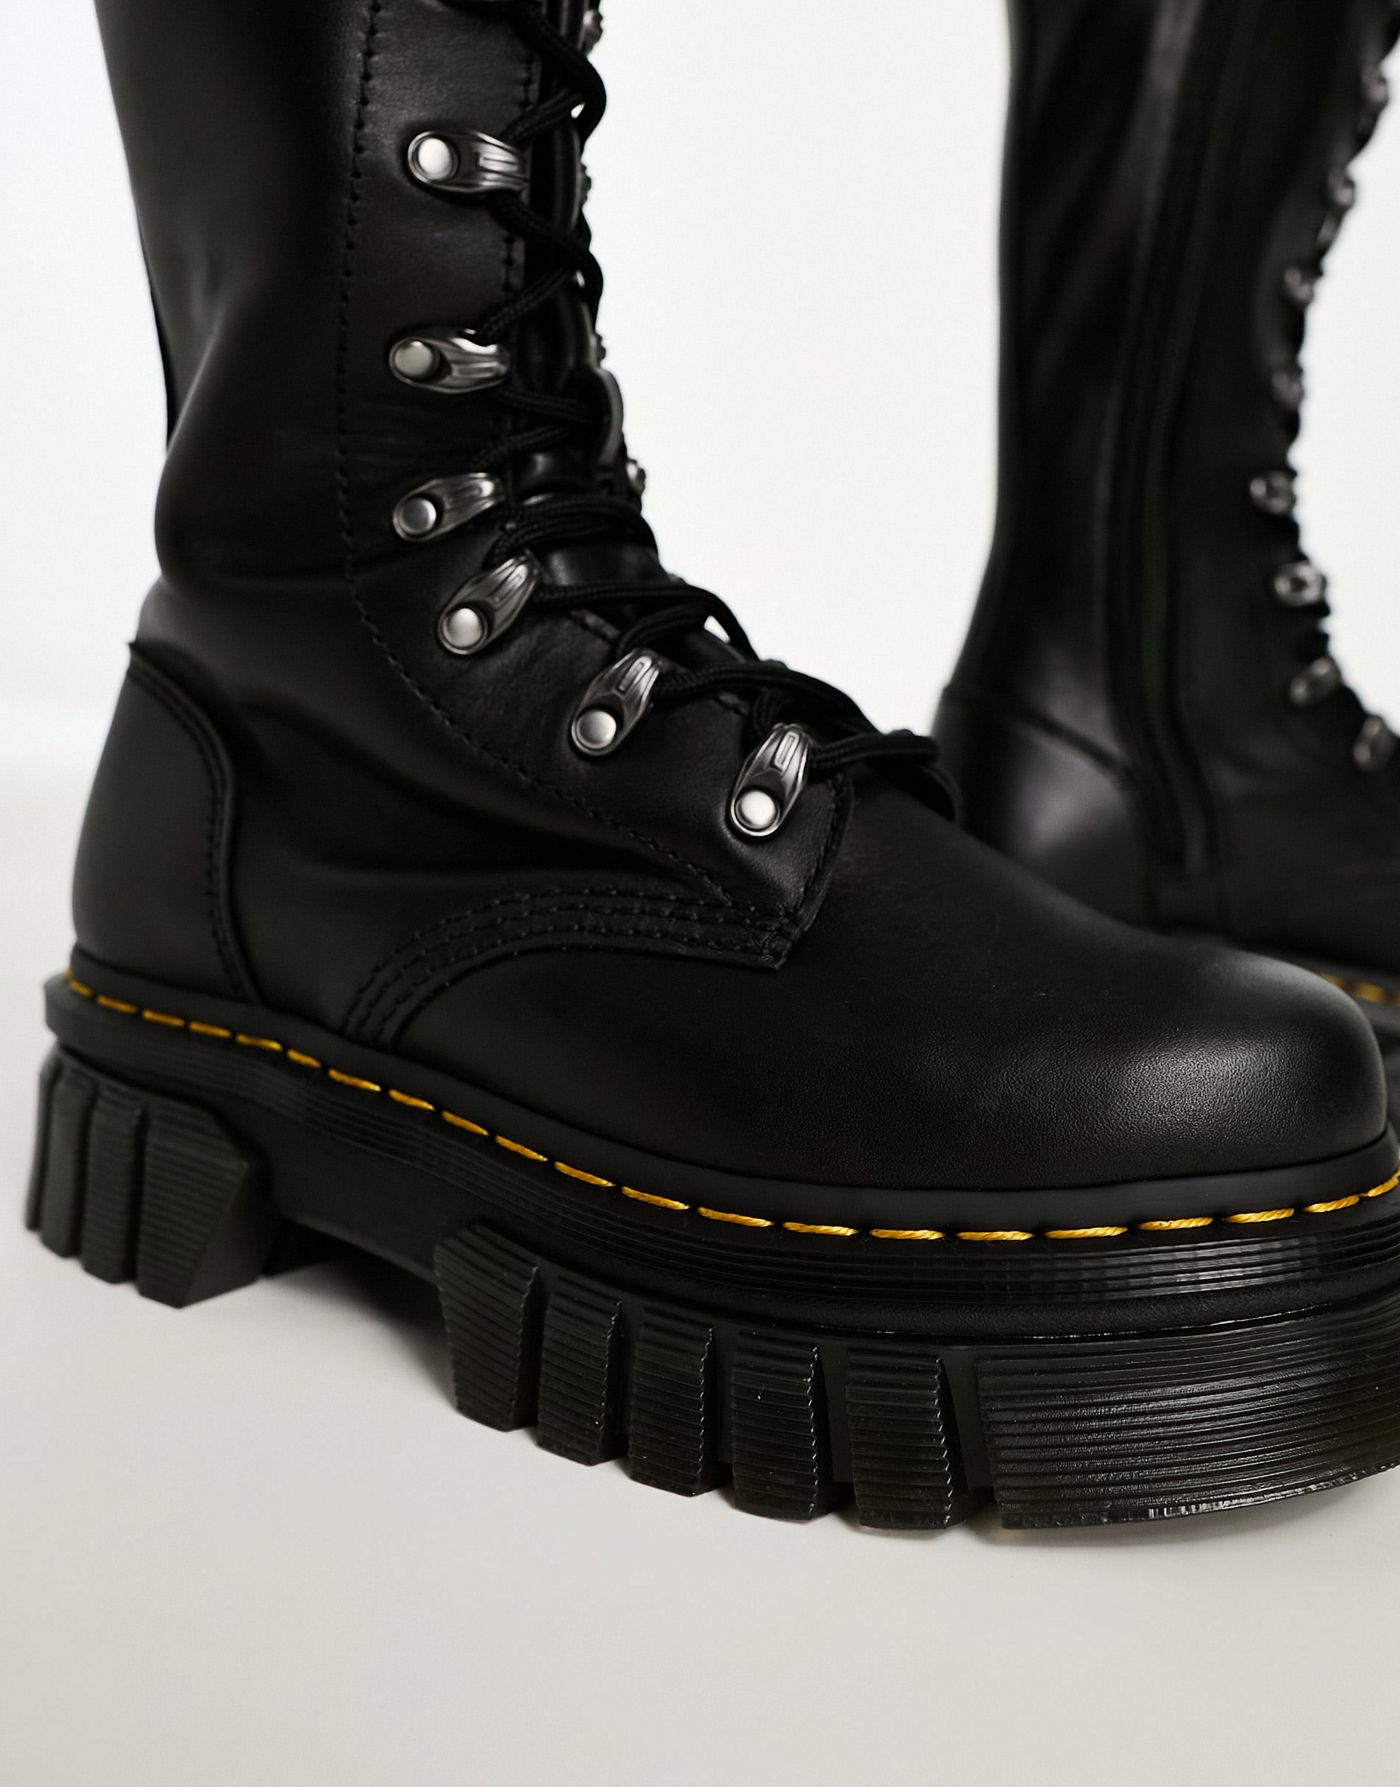 Dr Martens Audrick xtrm lace 20 eye boots in black nappa leather